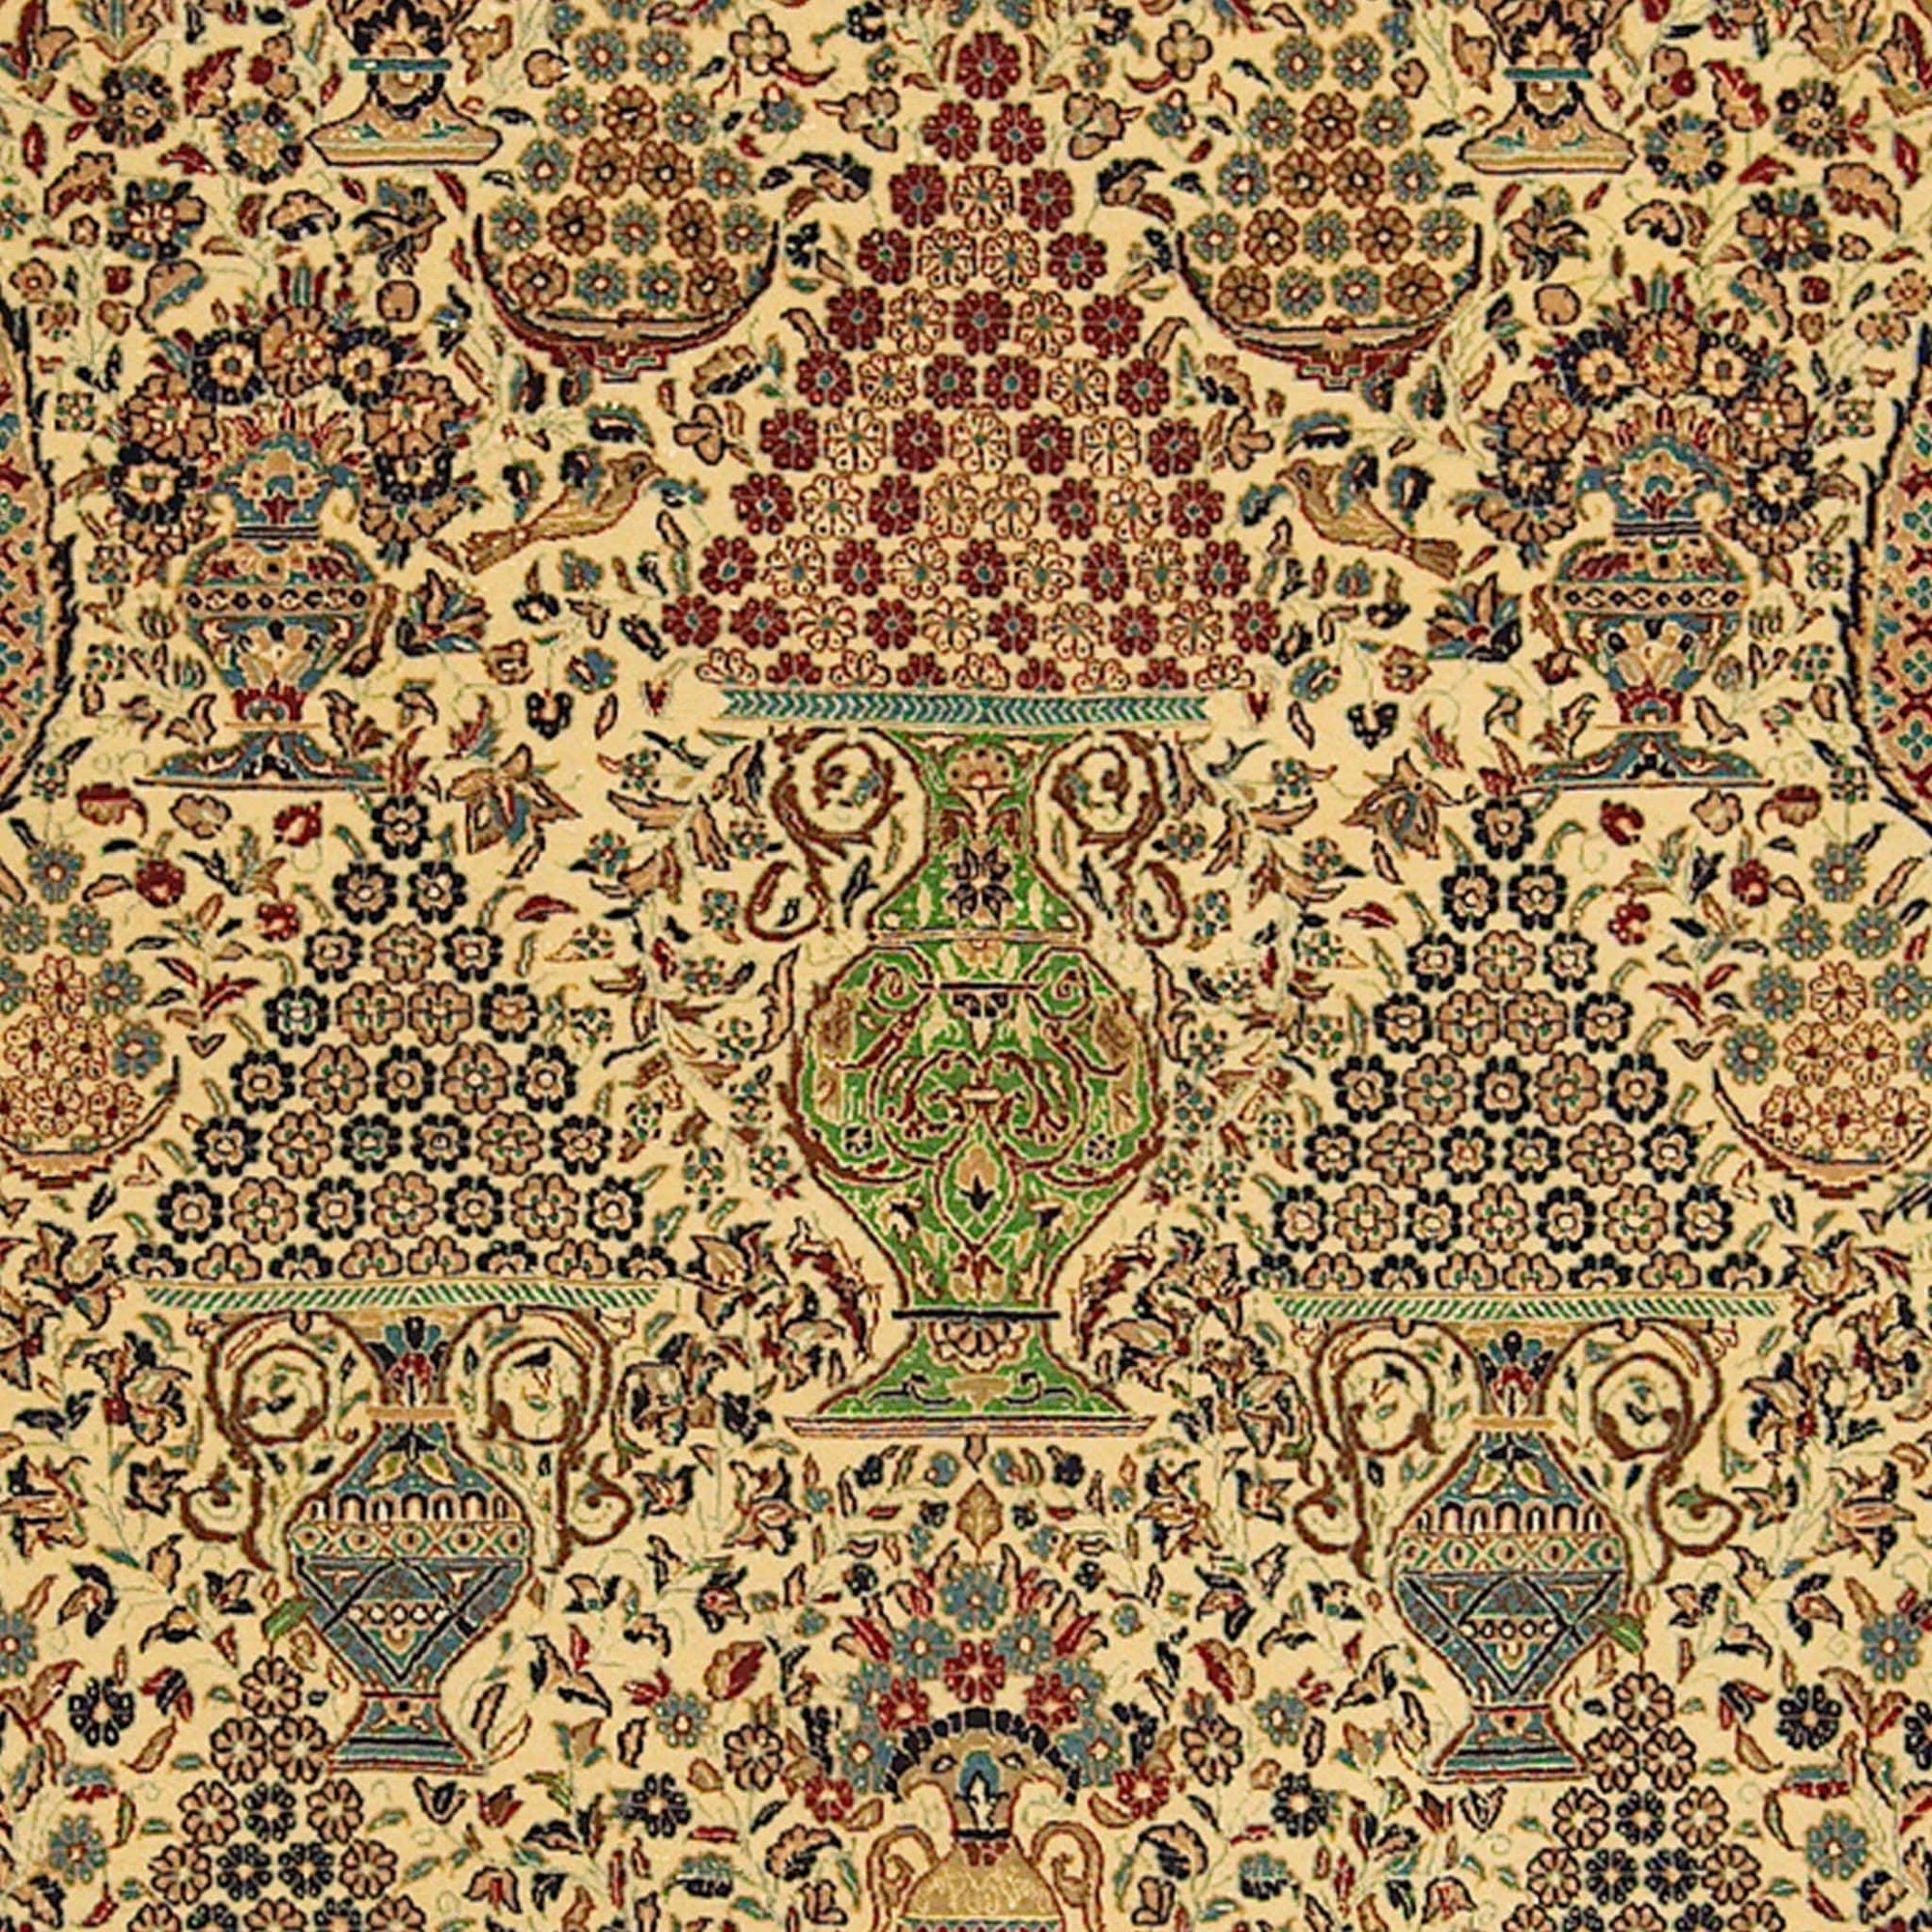 Genuine Fine Hand-knotted Persian Wool and Silk Nain Rug (SIGNED HABIBIAN) 162cm x 248cm